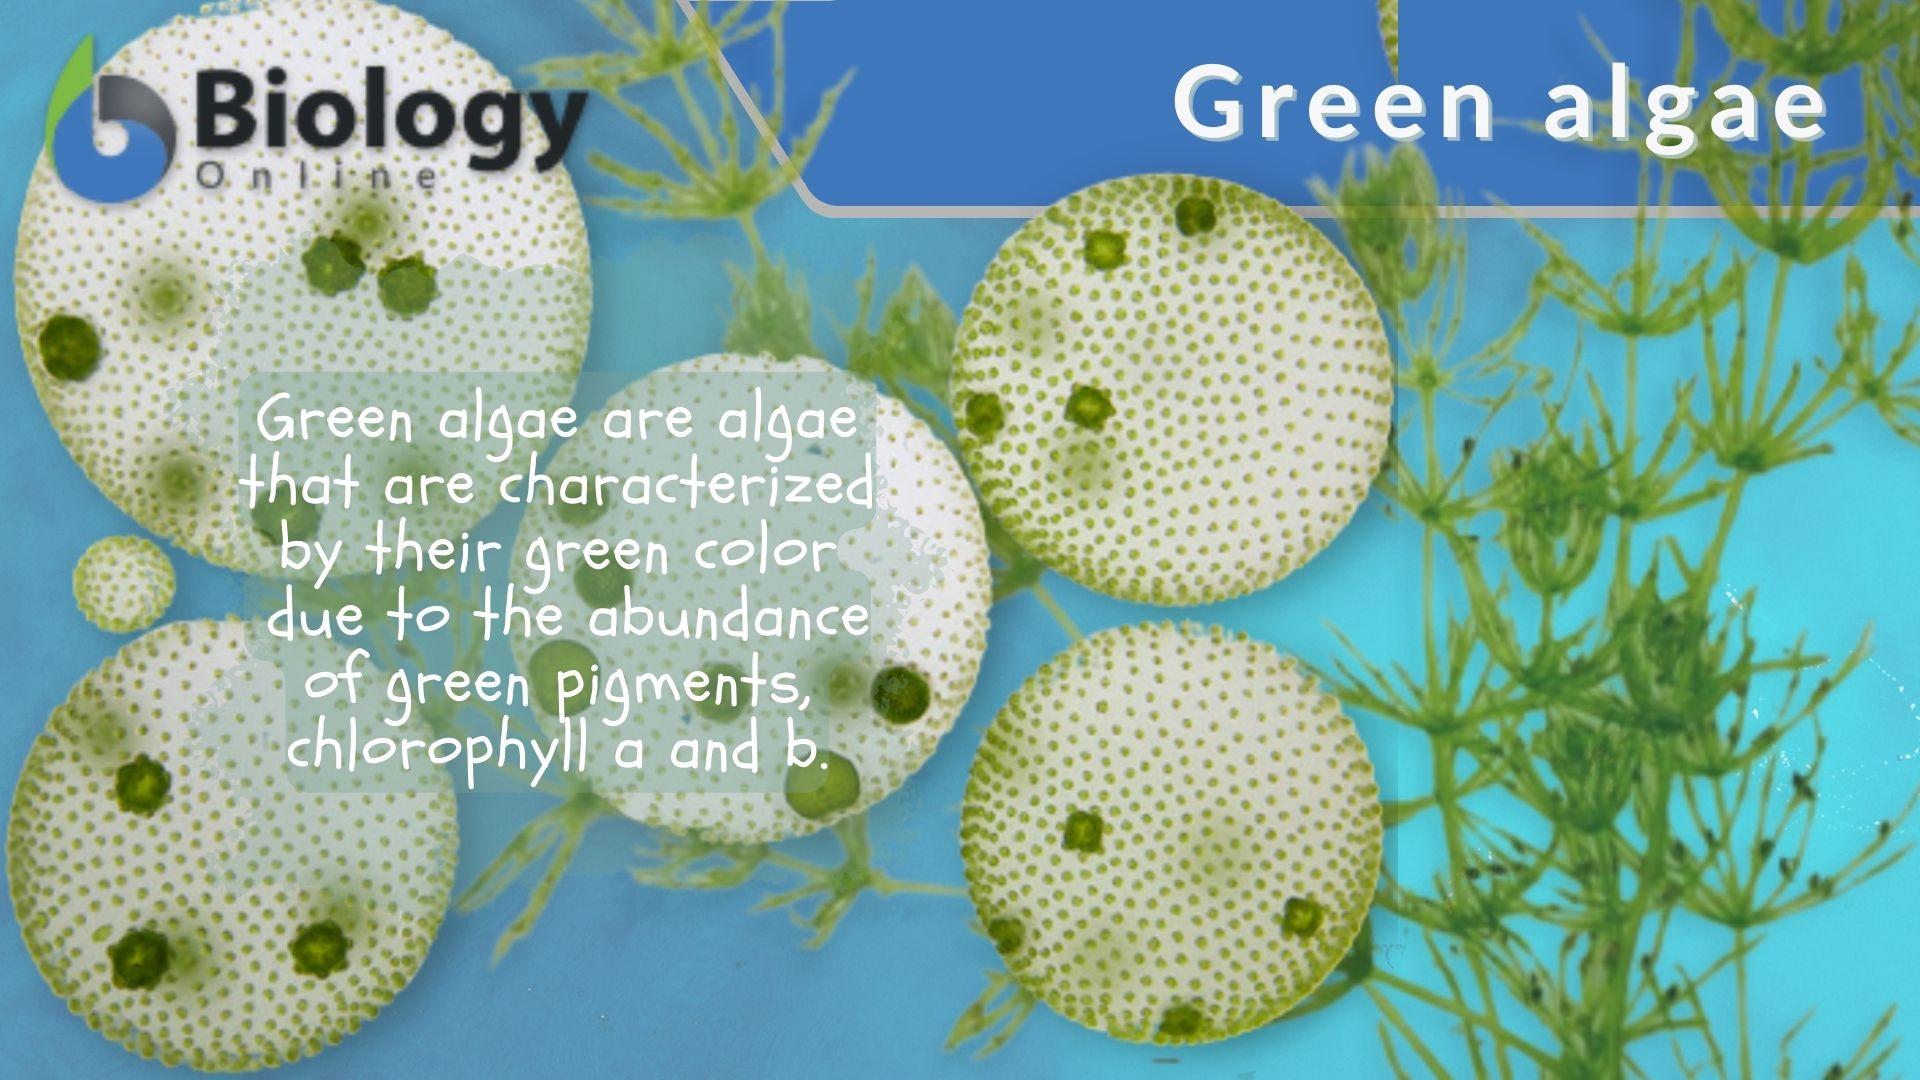 what are the different shapes of chloroplast in deifferent algal groups 